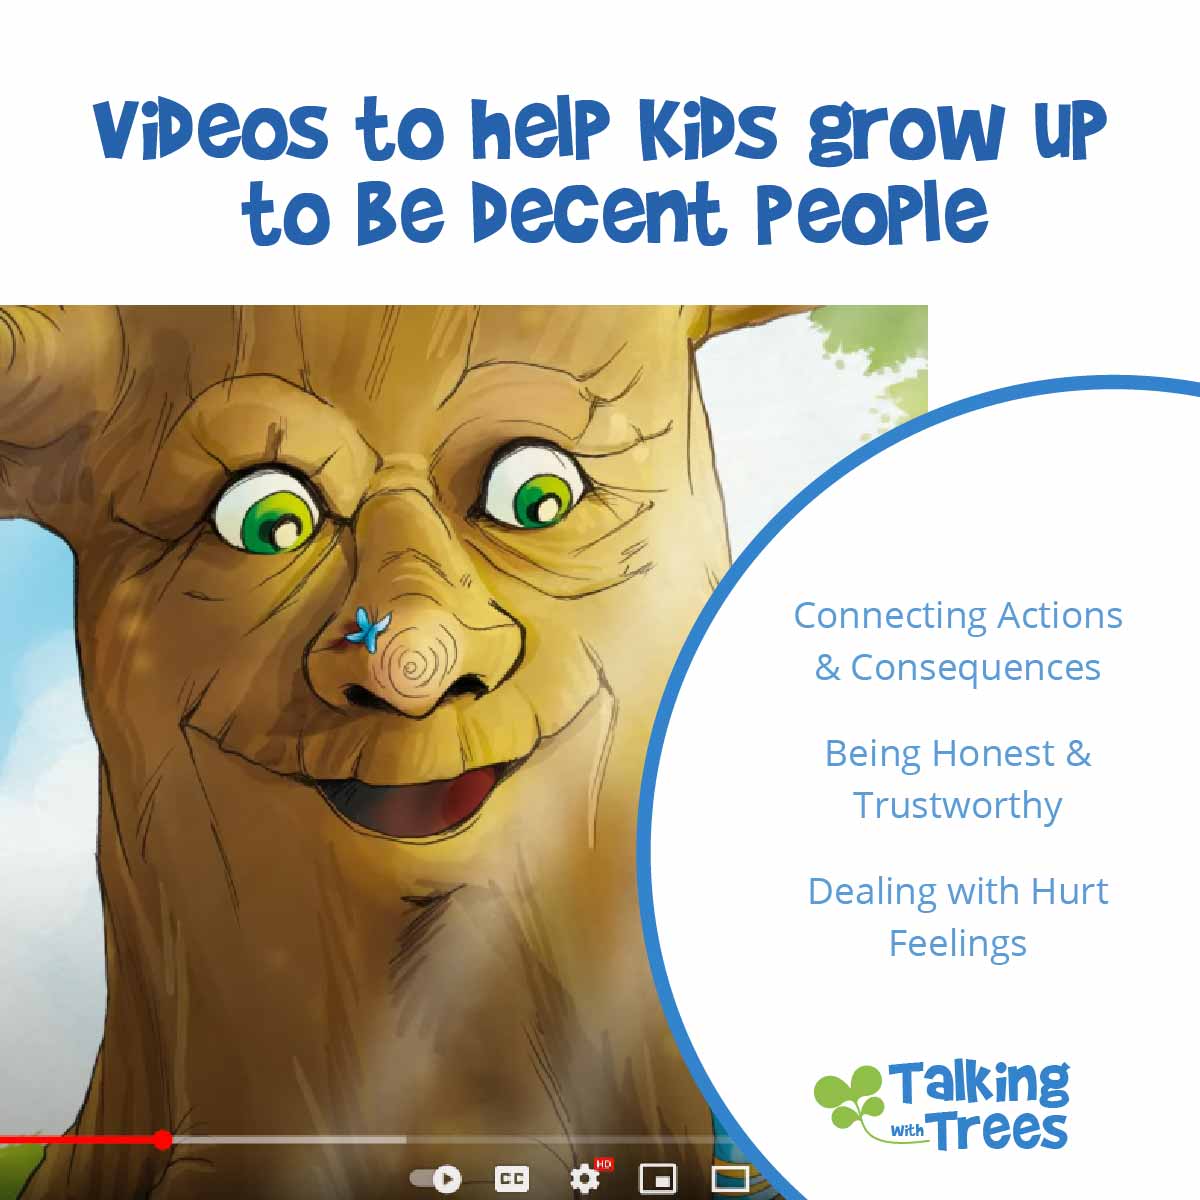 Videos that teach kids about values and being a decent person